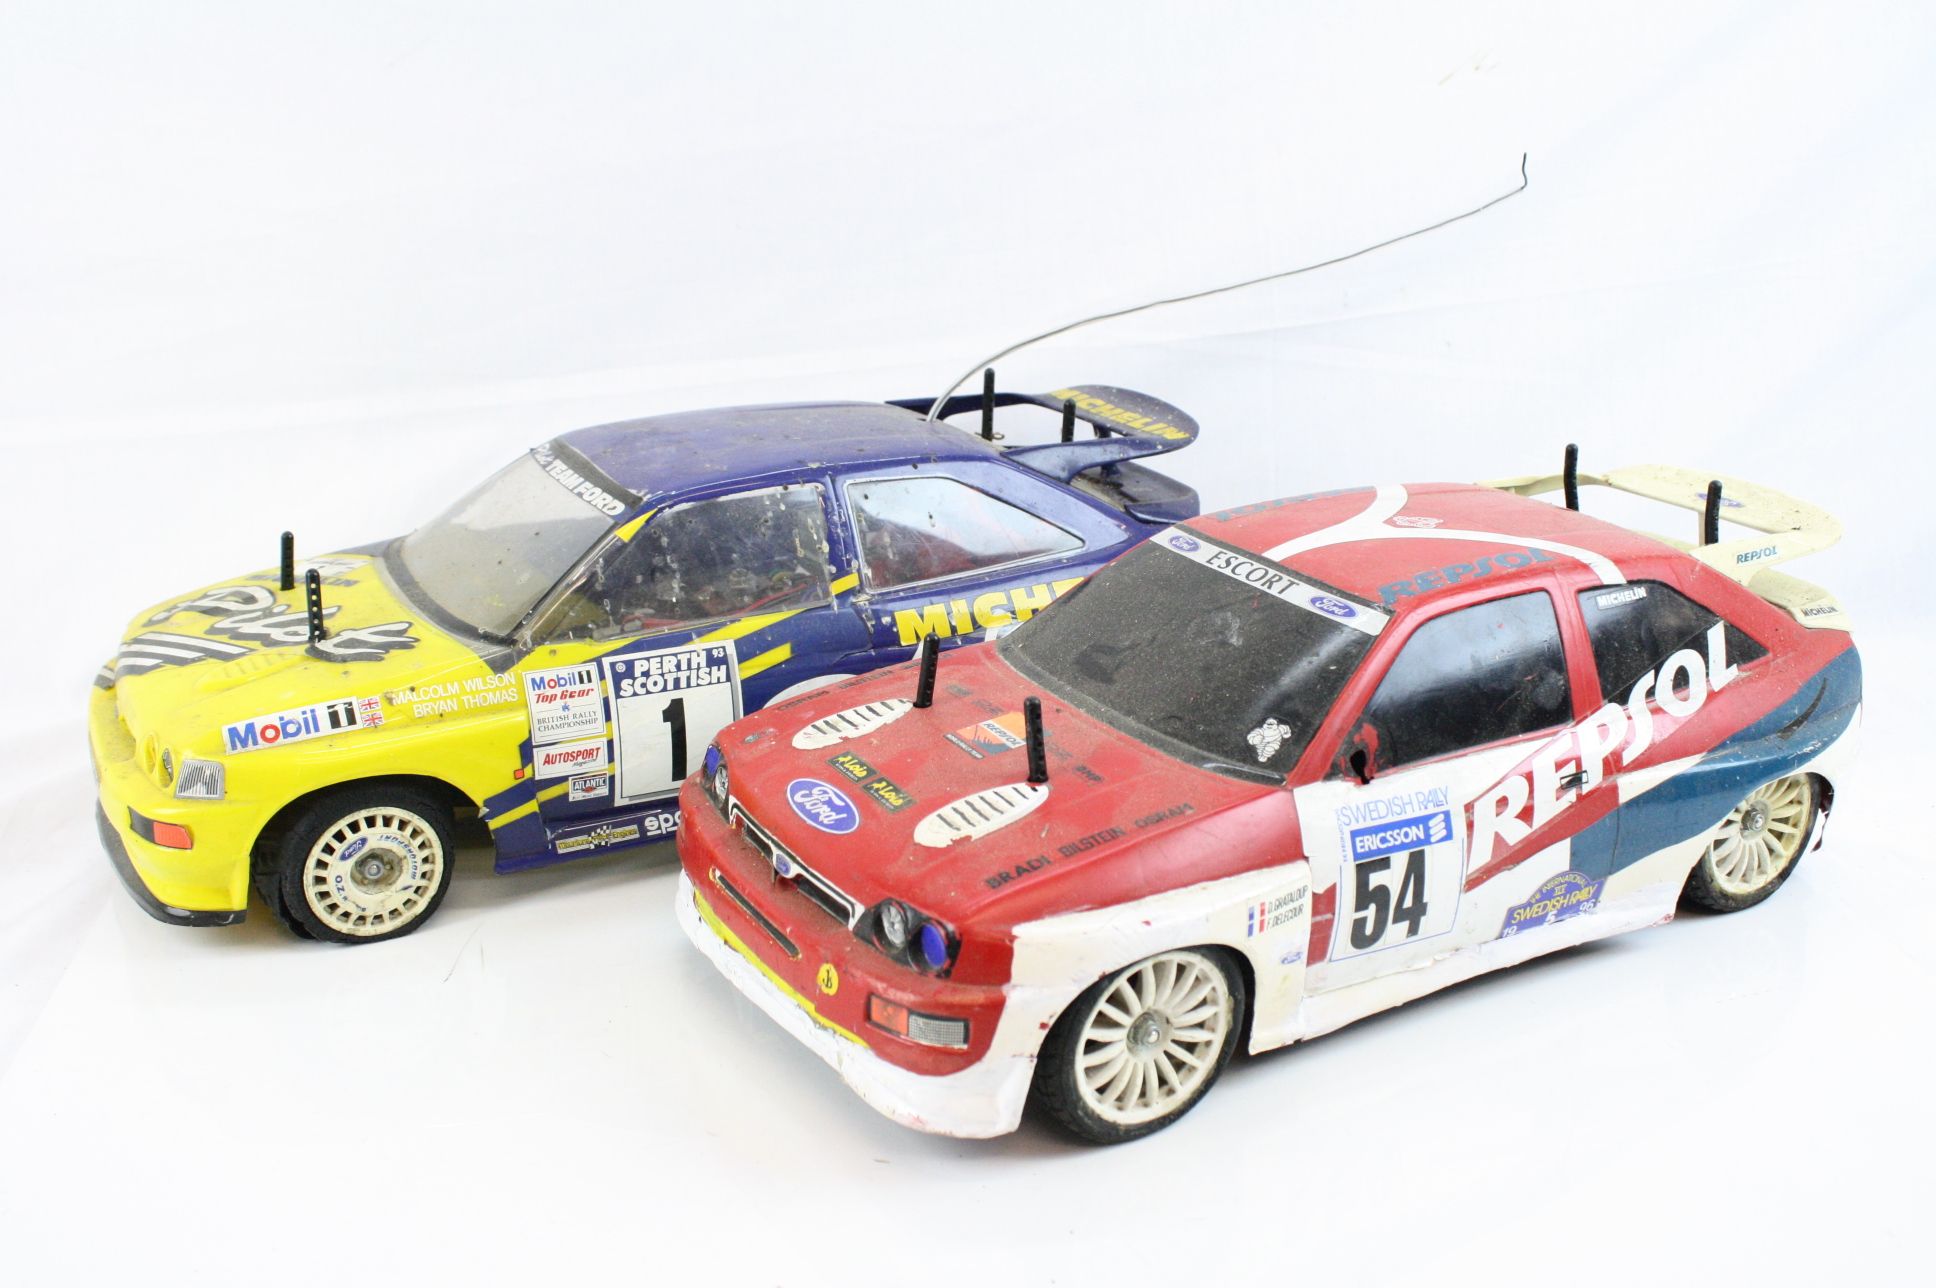 A Tamiya 58125 Ford Escort RS Michelin Pilot with TA01 chassis together with a Tamiya Ford Escort RS